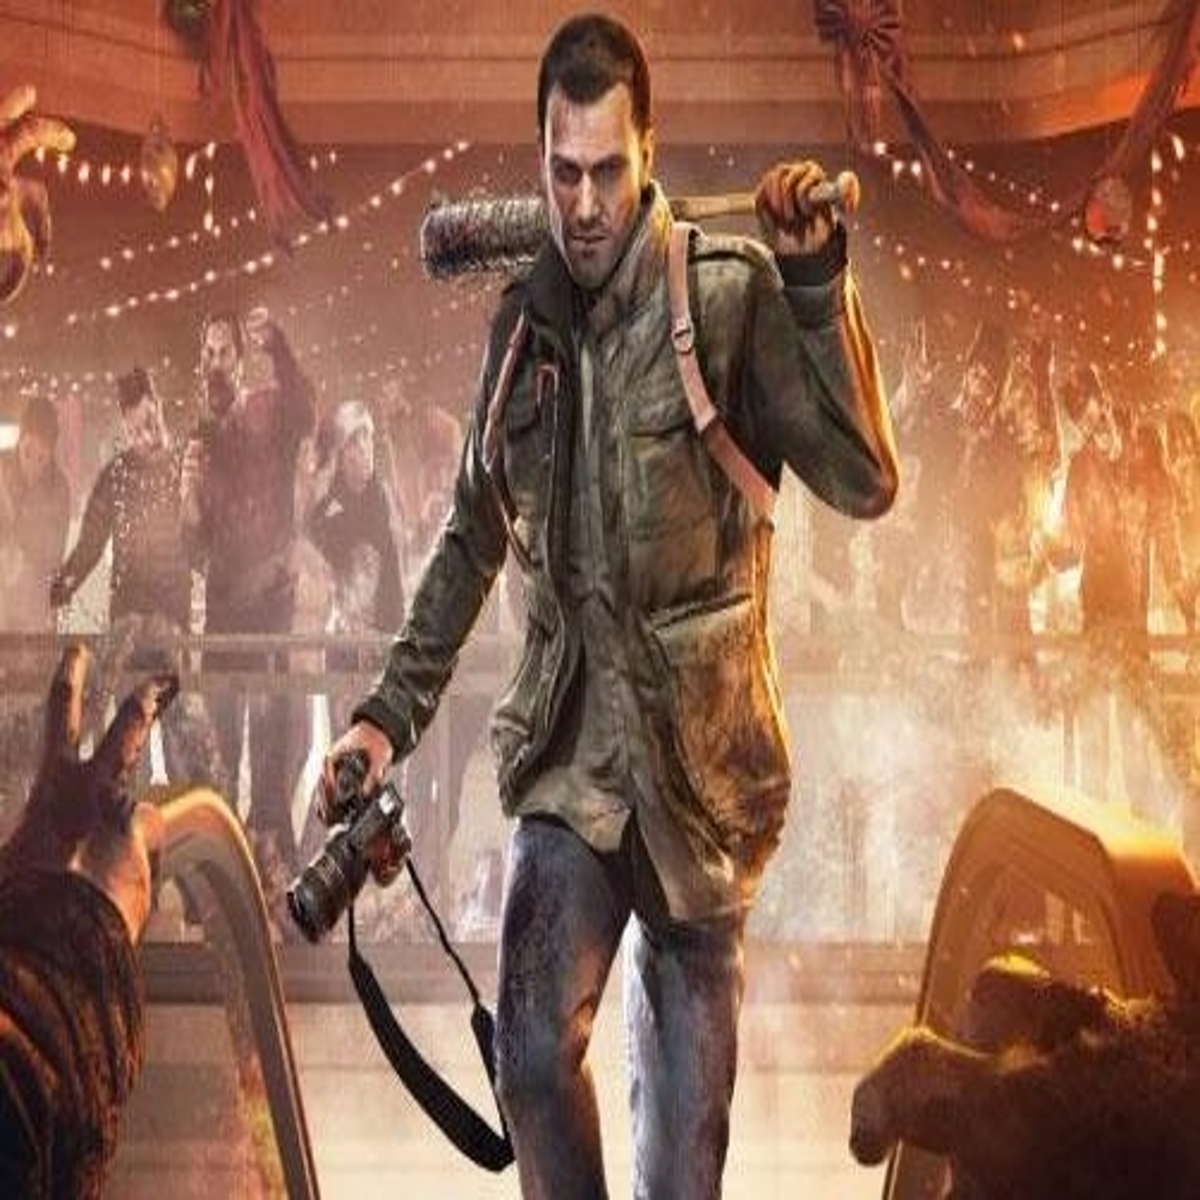 Dead Rising 4 review: deadly disappointing, British GQ